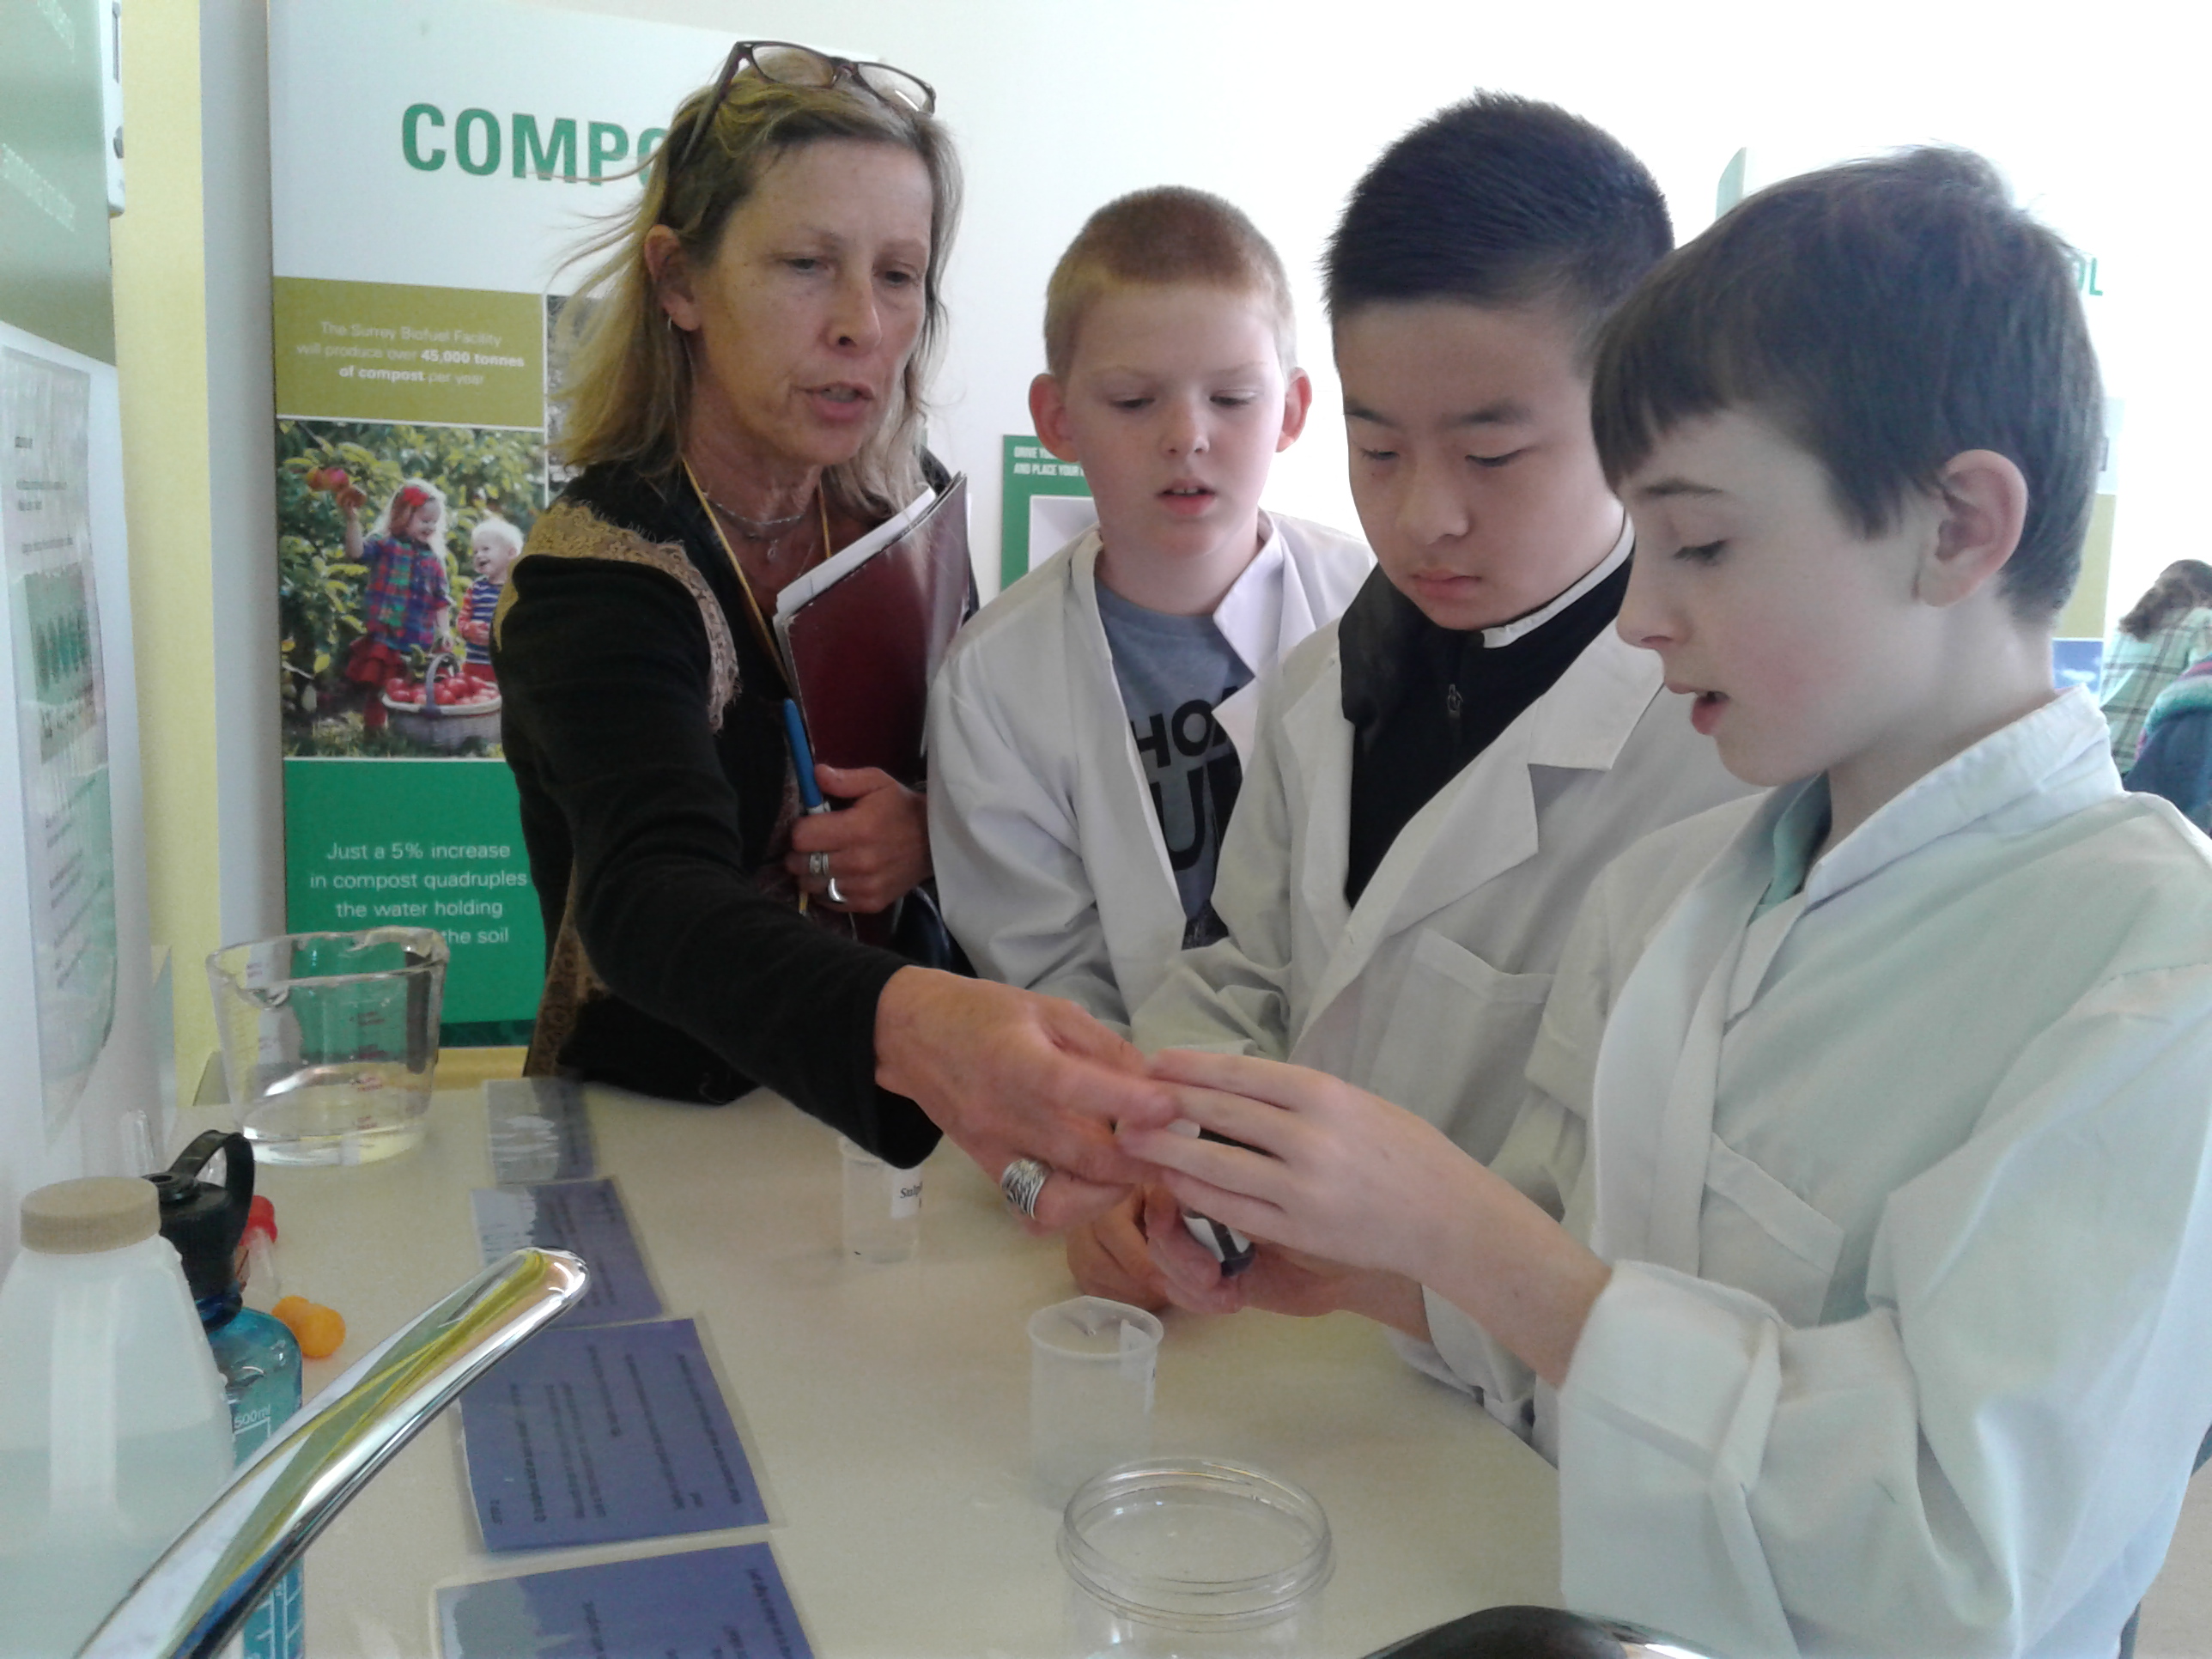 Hands-on learning at a biofuel facility